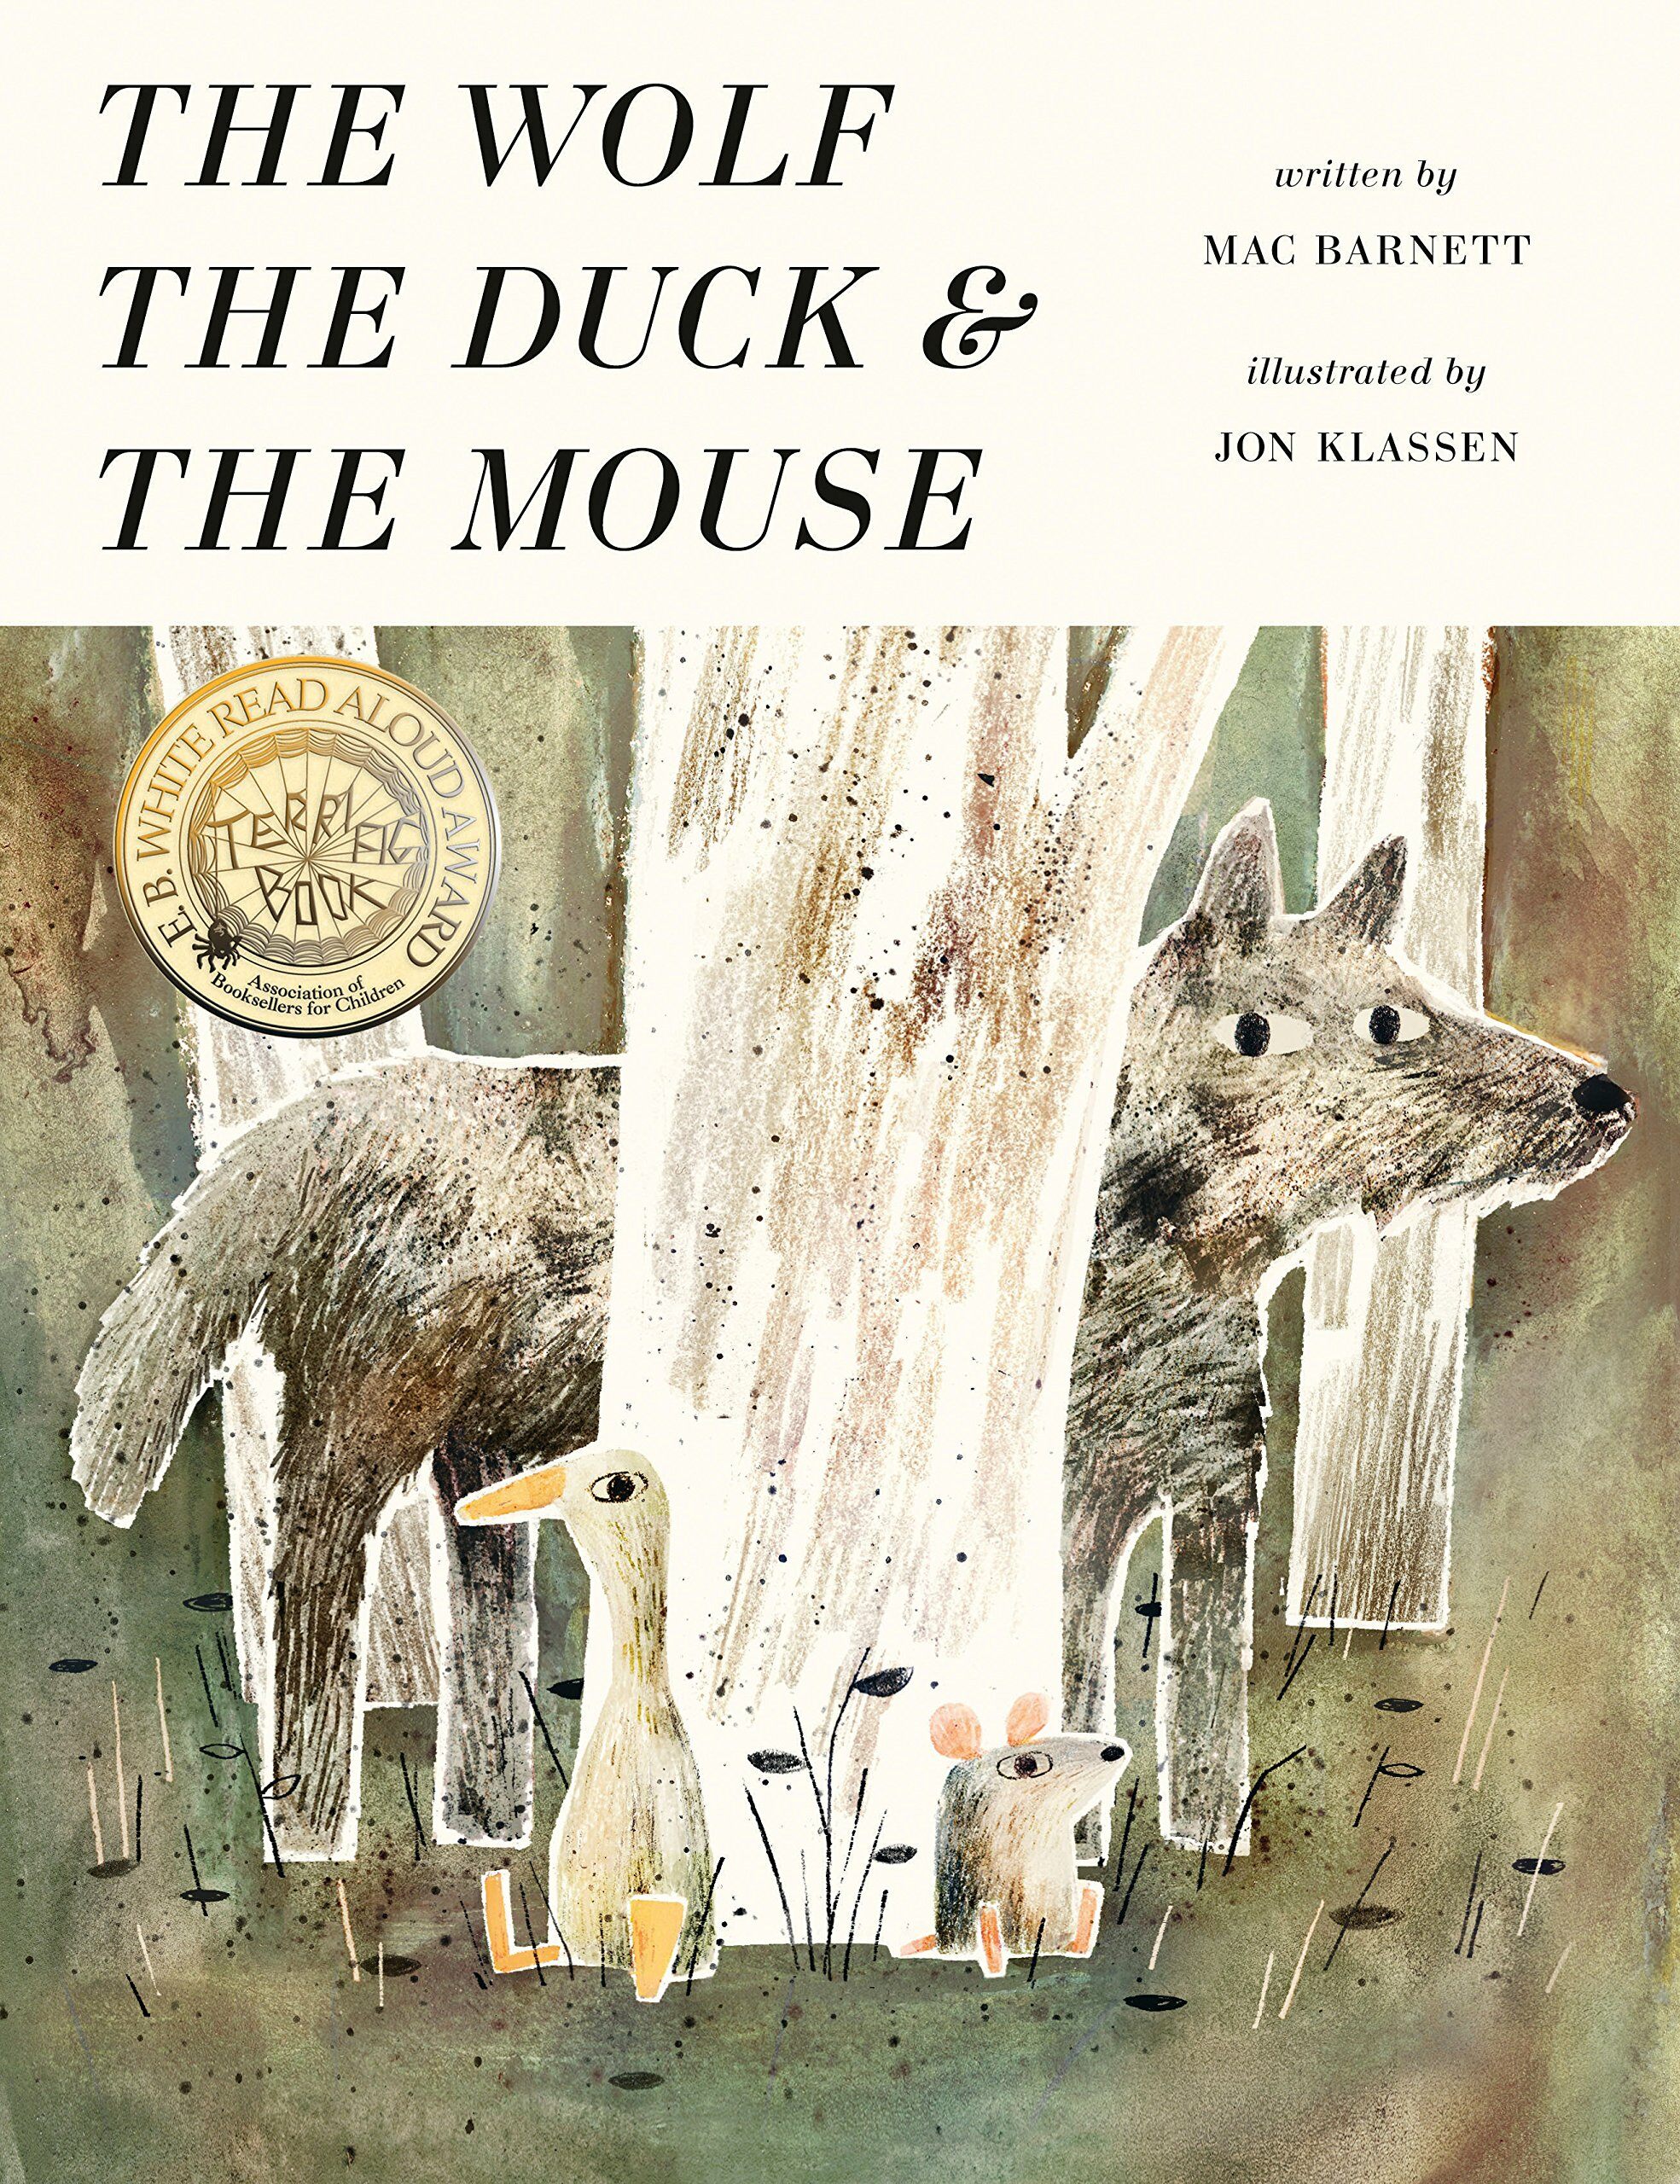 (The) wolf, the duck and the mouse